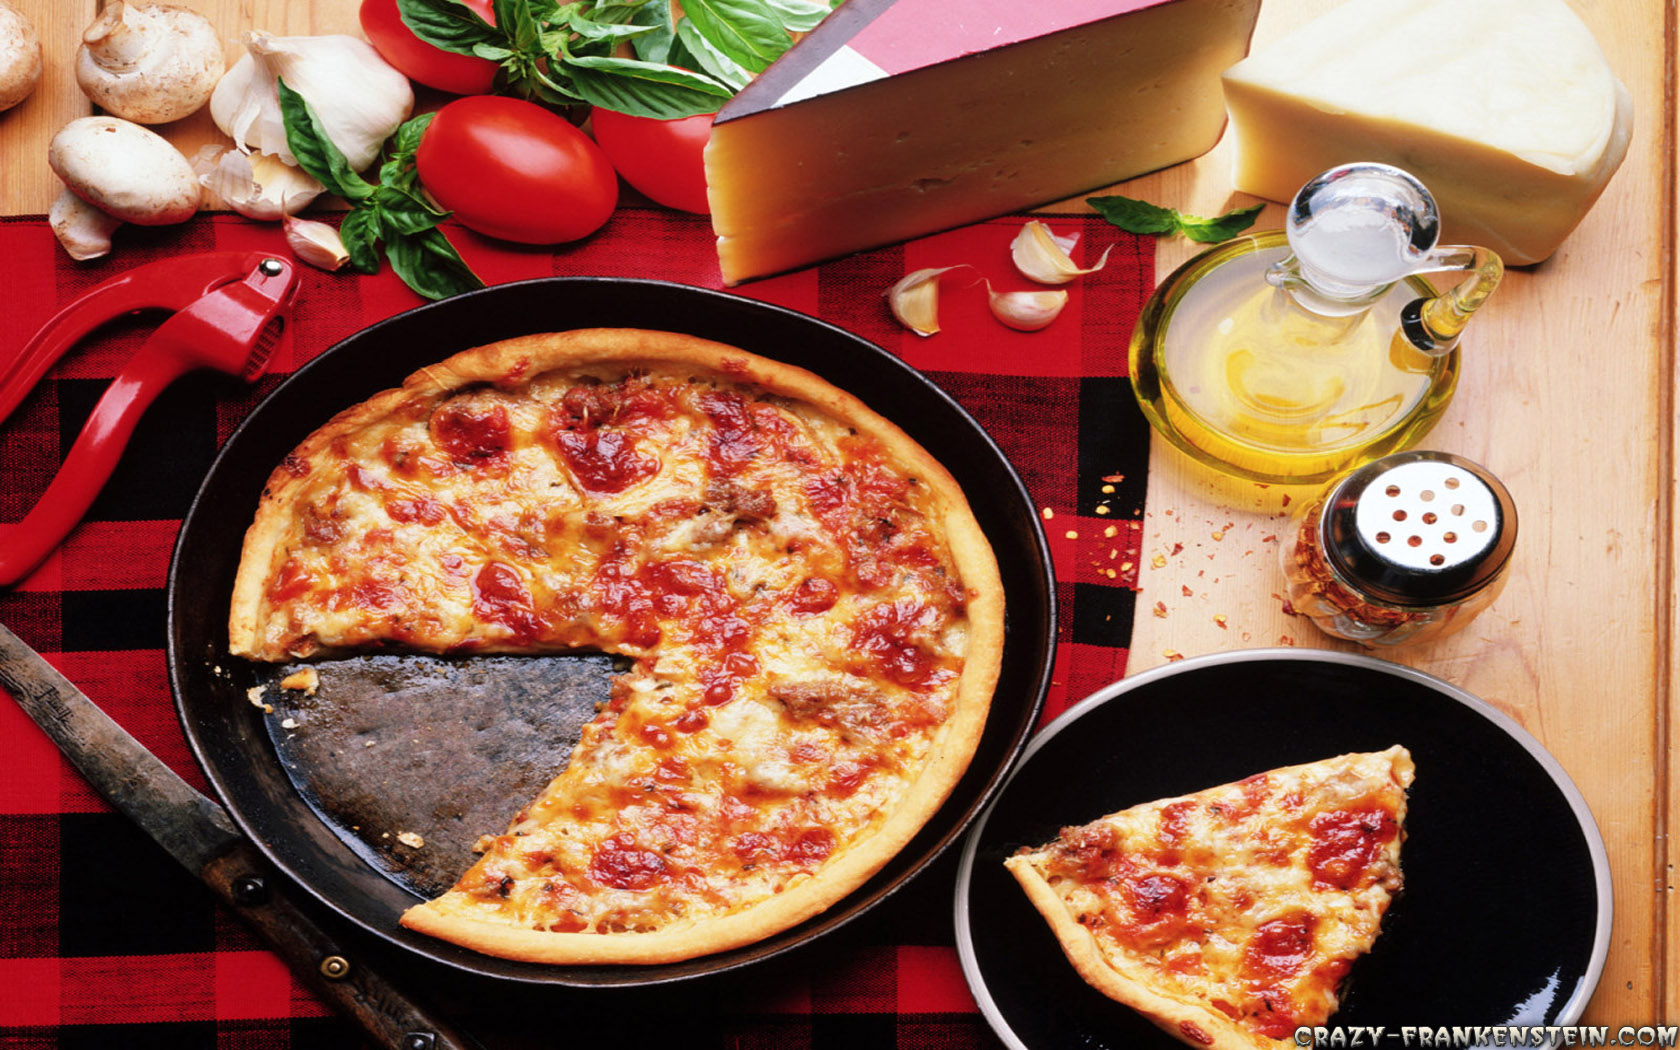 A deliciously topped pizza with mouthwatering ingredients.